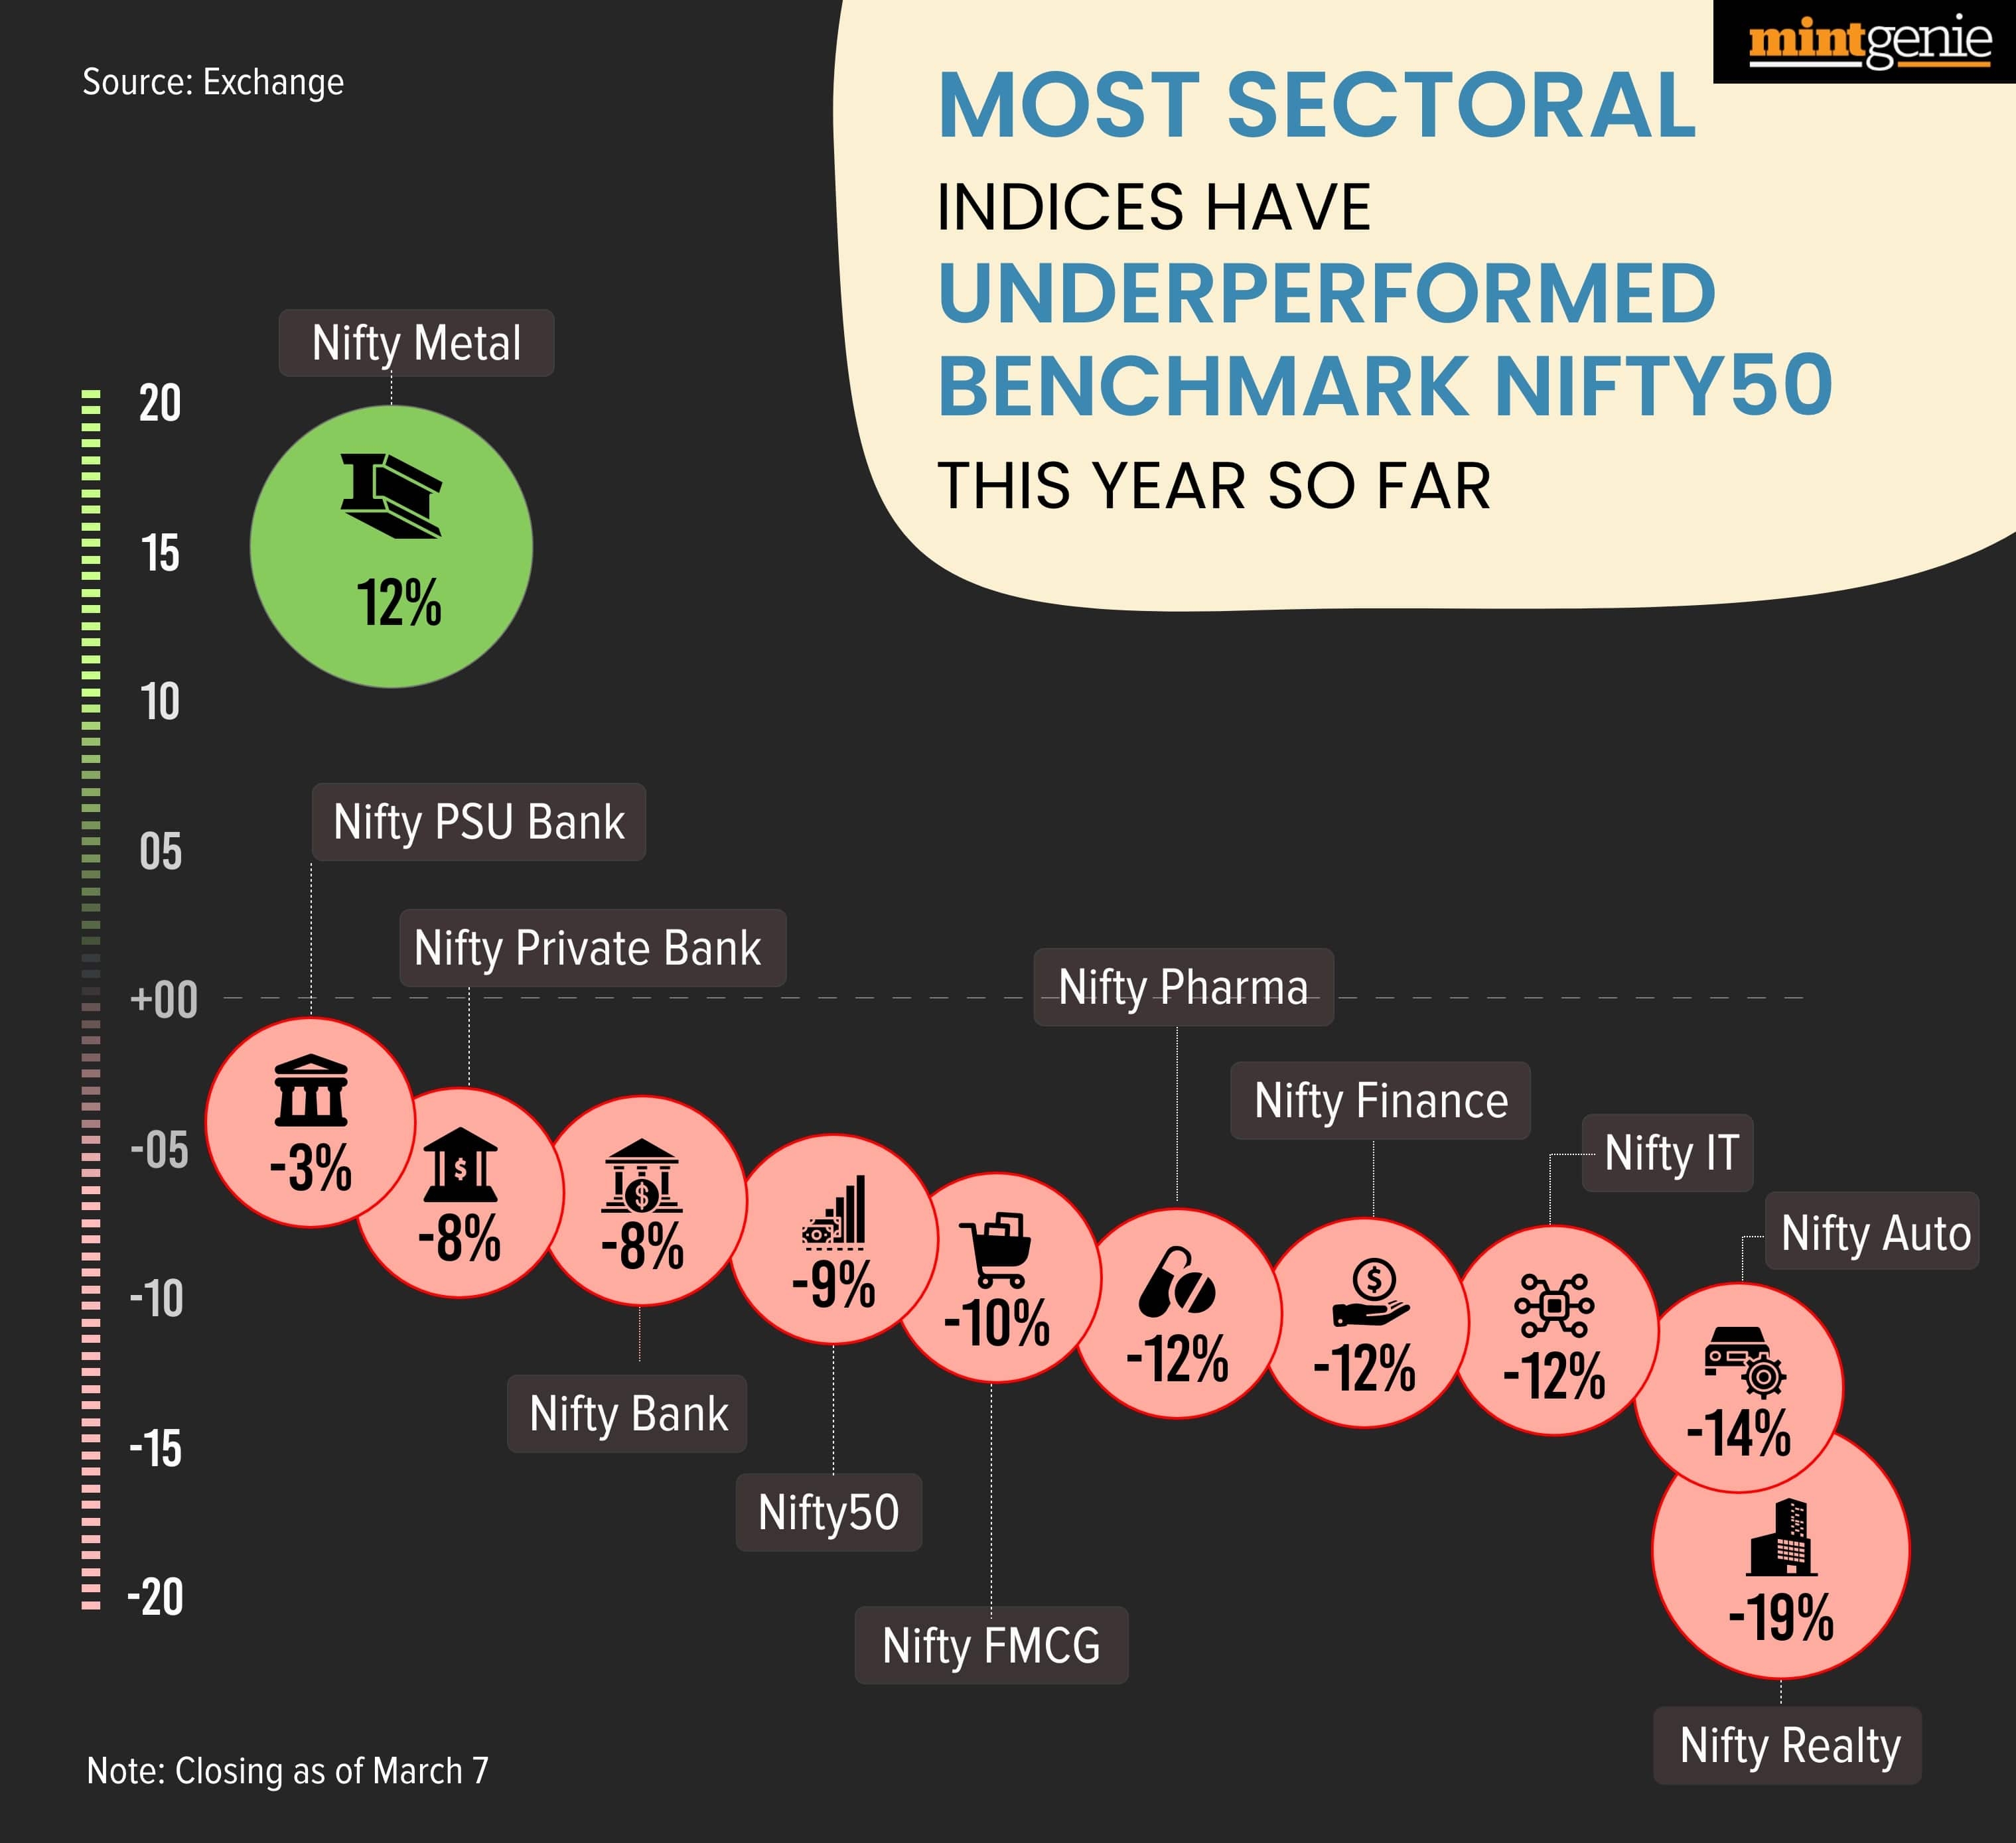 Most Sectoral Indices have underperformed benchmark Nifty,